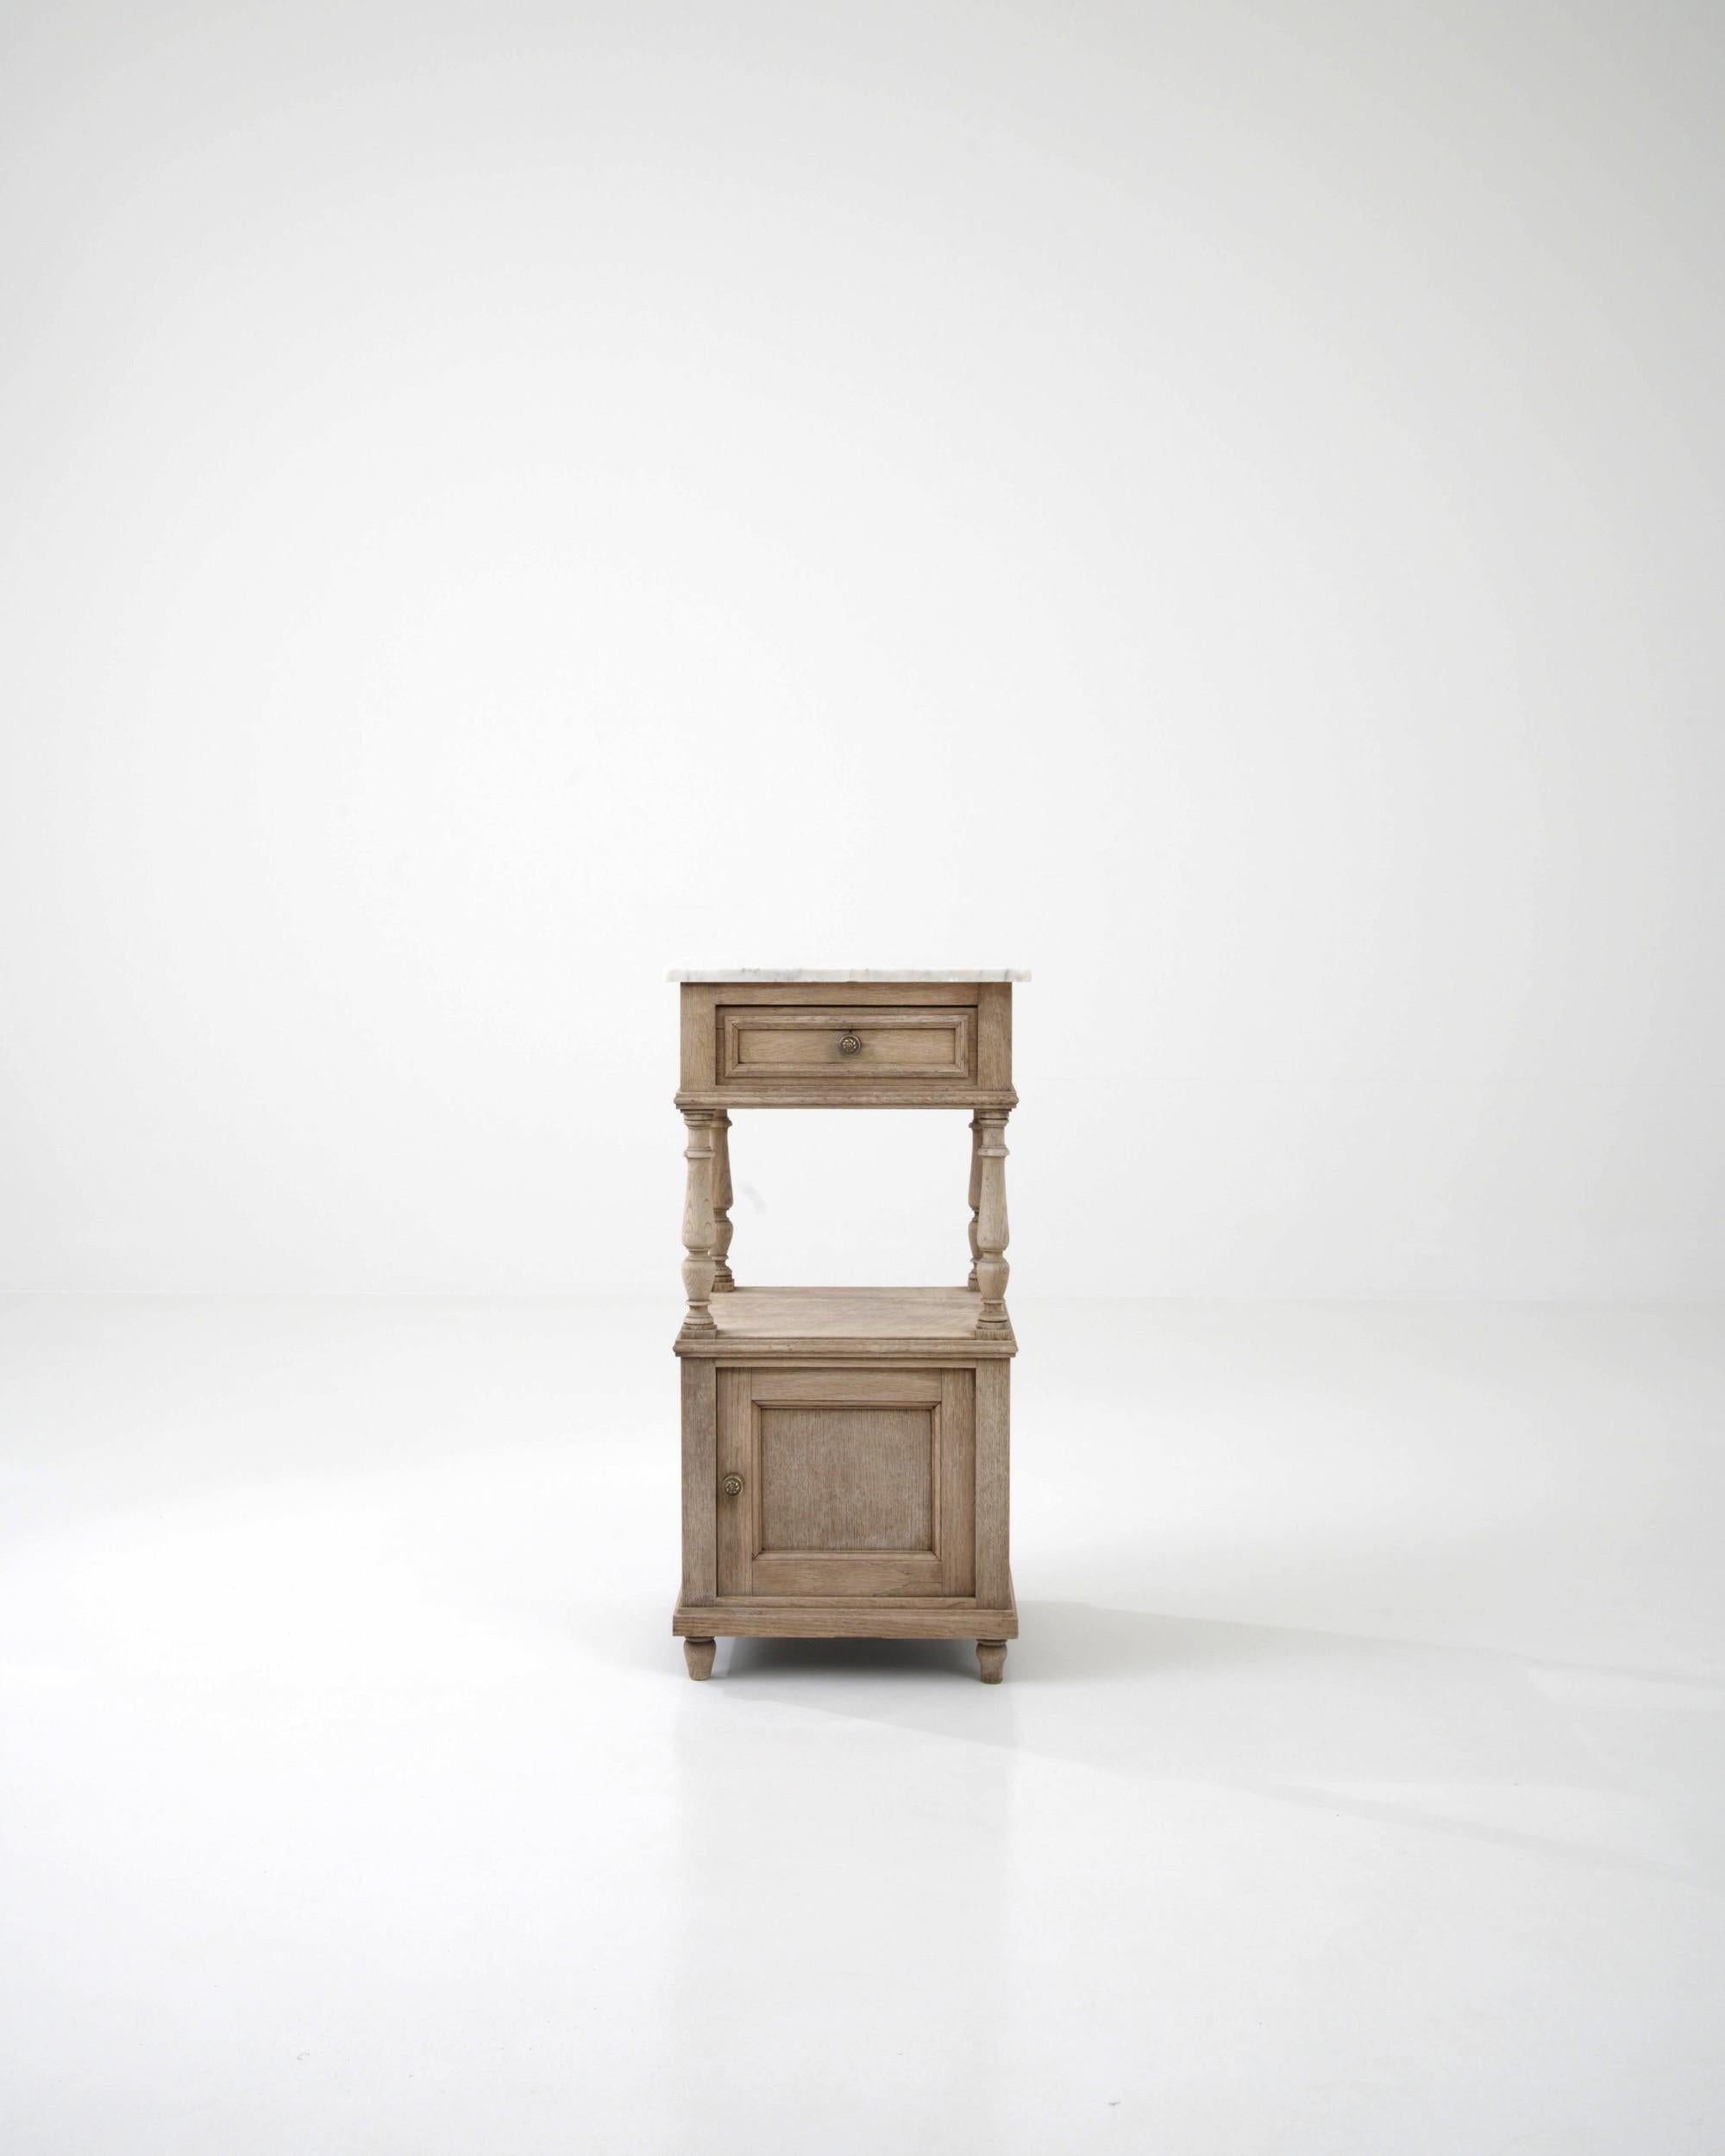 An oak night stand created in France circa 1900. Traditionally crafted, this subtly styled bedside table is adorned with a marble top, projecting a sense of calm and refined elegance. Cloudy gray veins drift through the ivory colored marble top